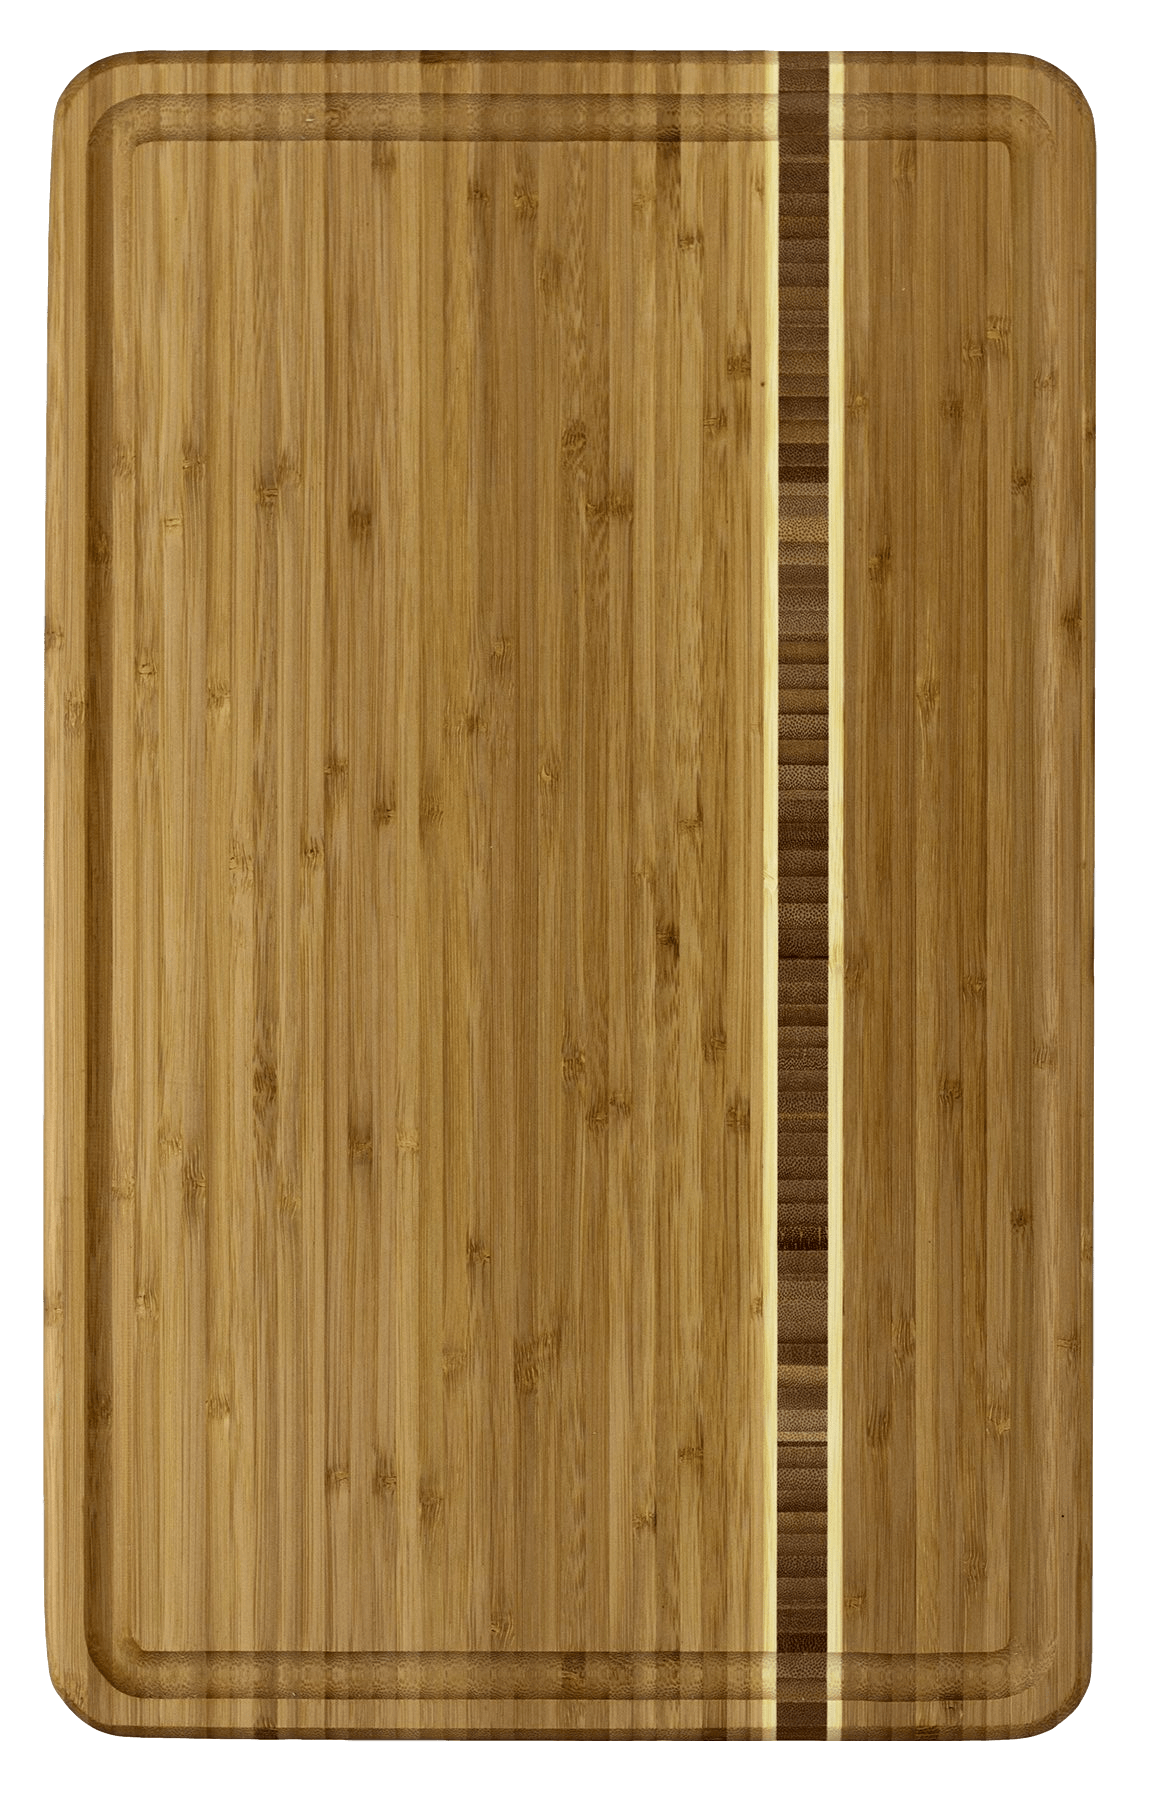 Dominica Serving and Cutting Board - Bamboo